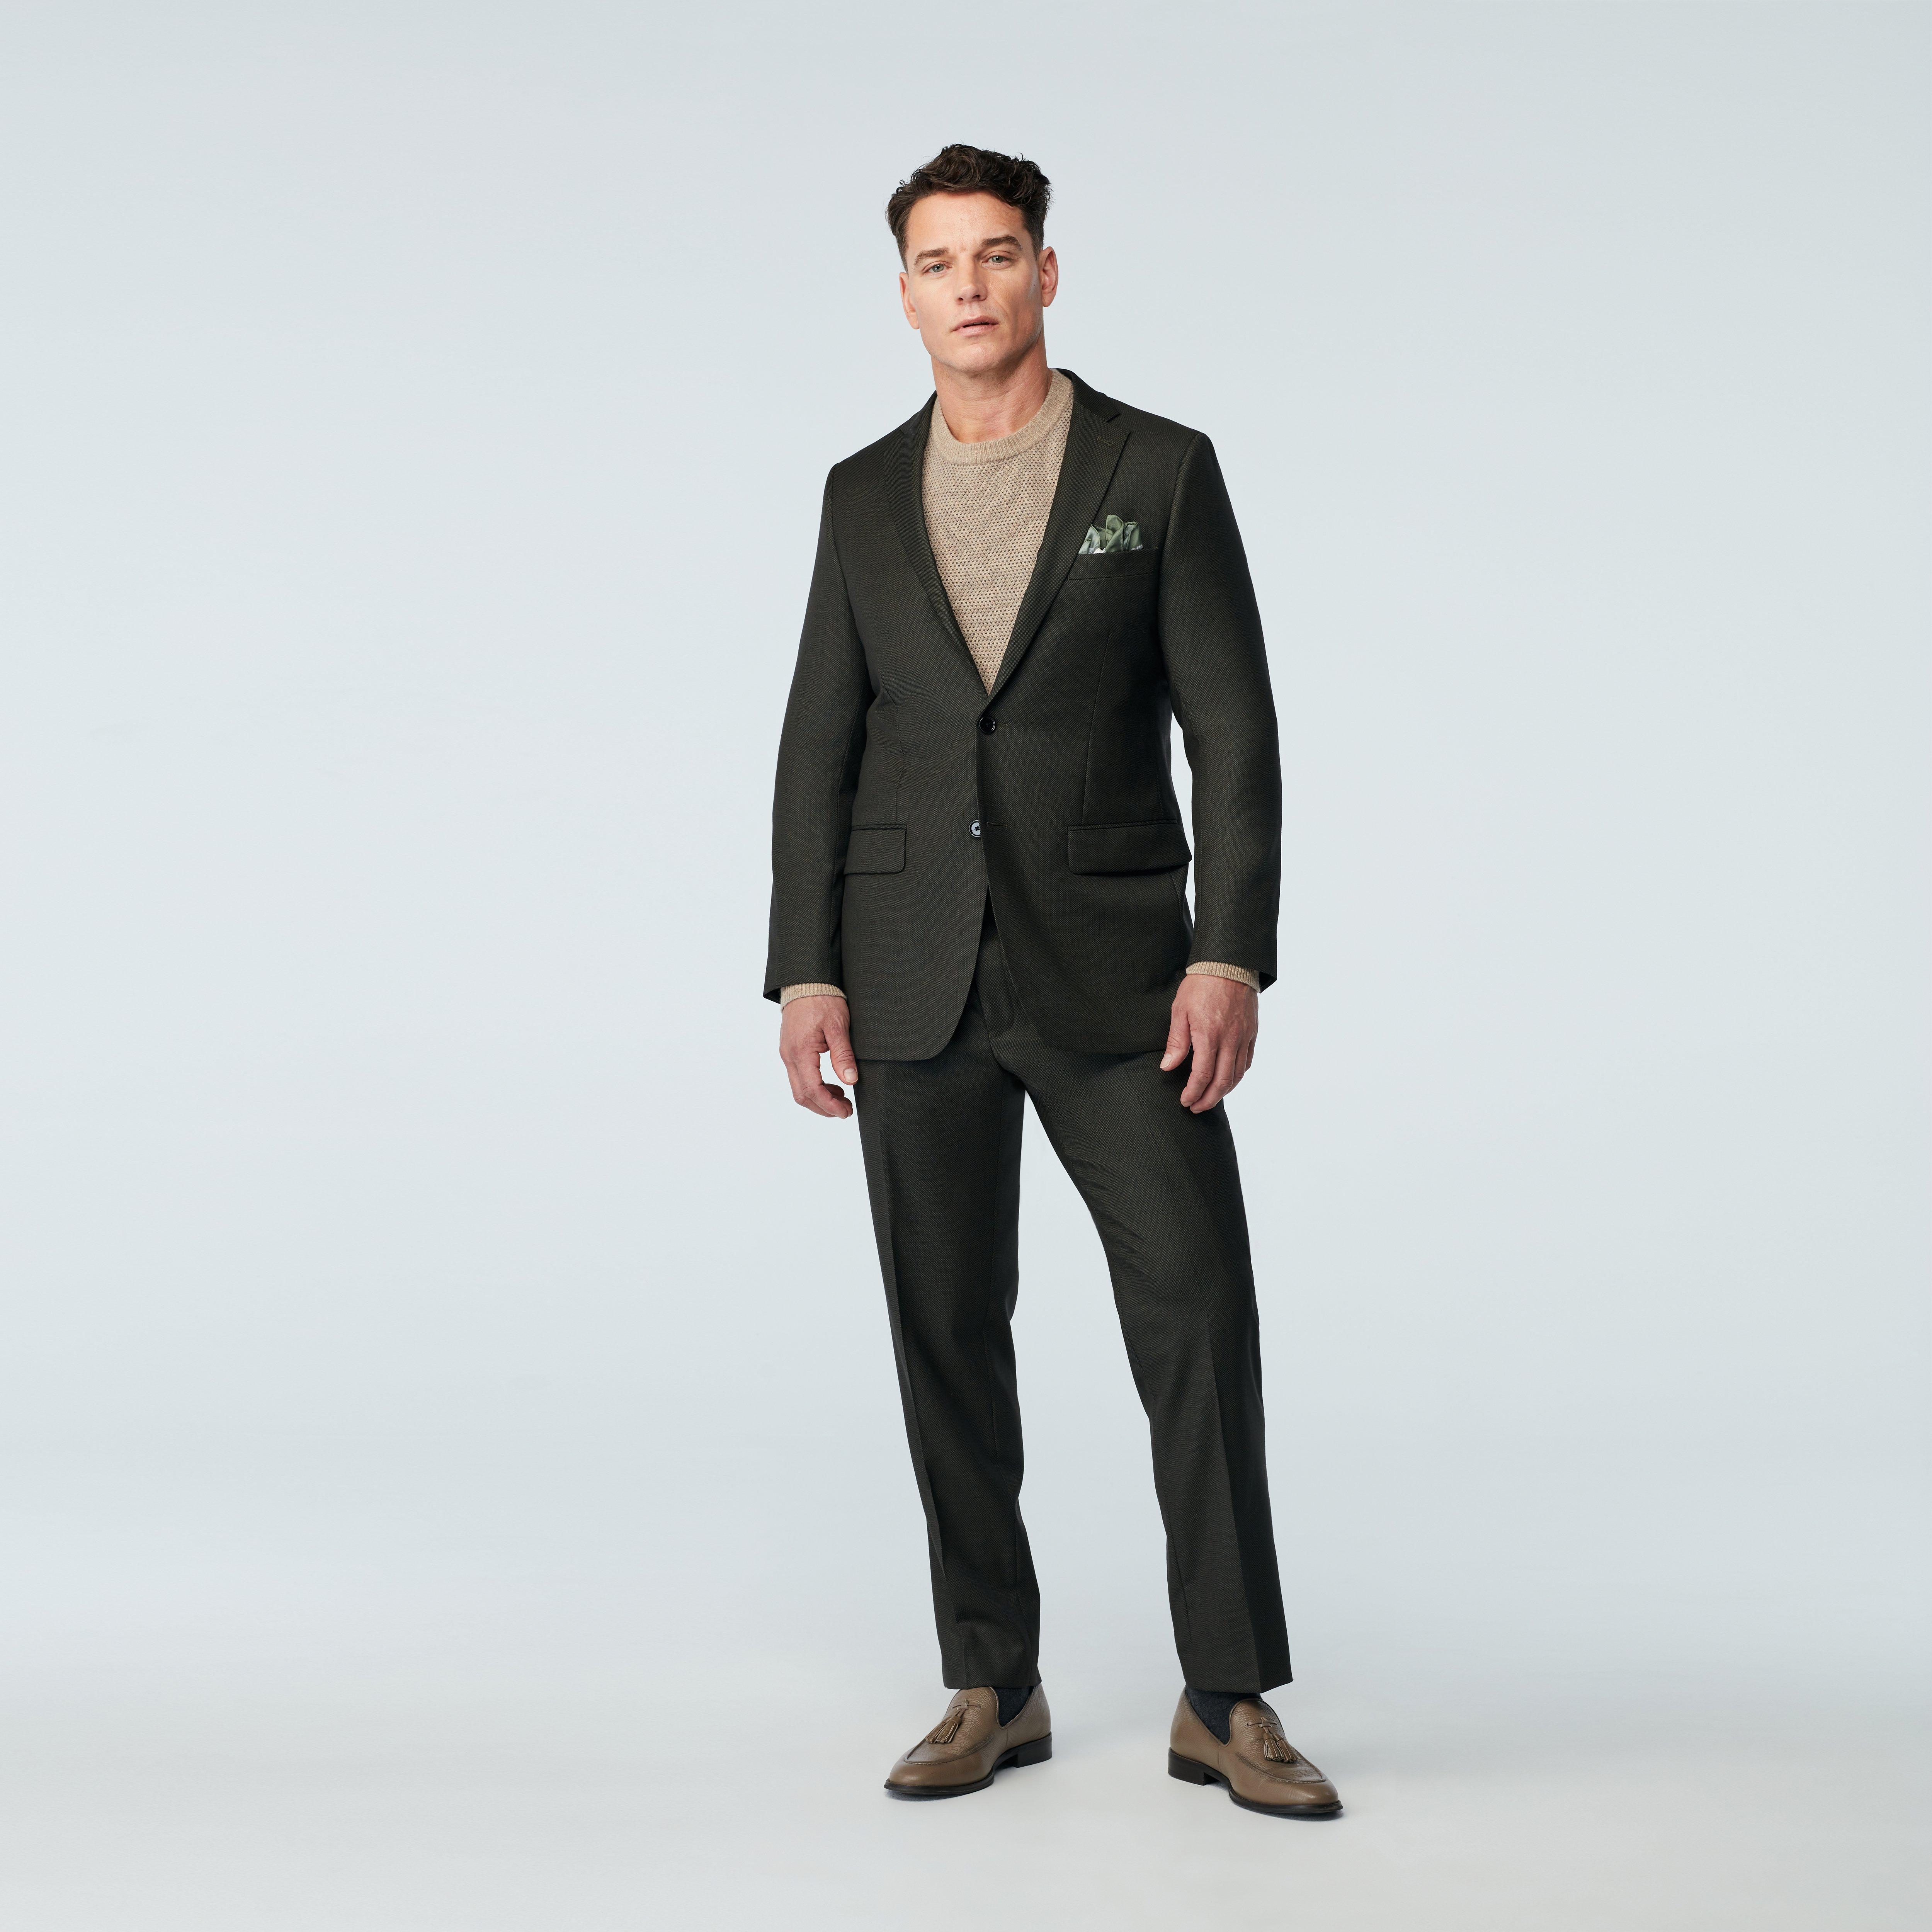 Custom Suits Made For You - Highbridge Nailhead Olive Suit | INDOCHINO